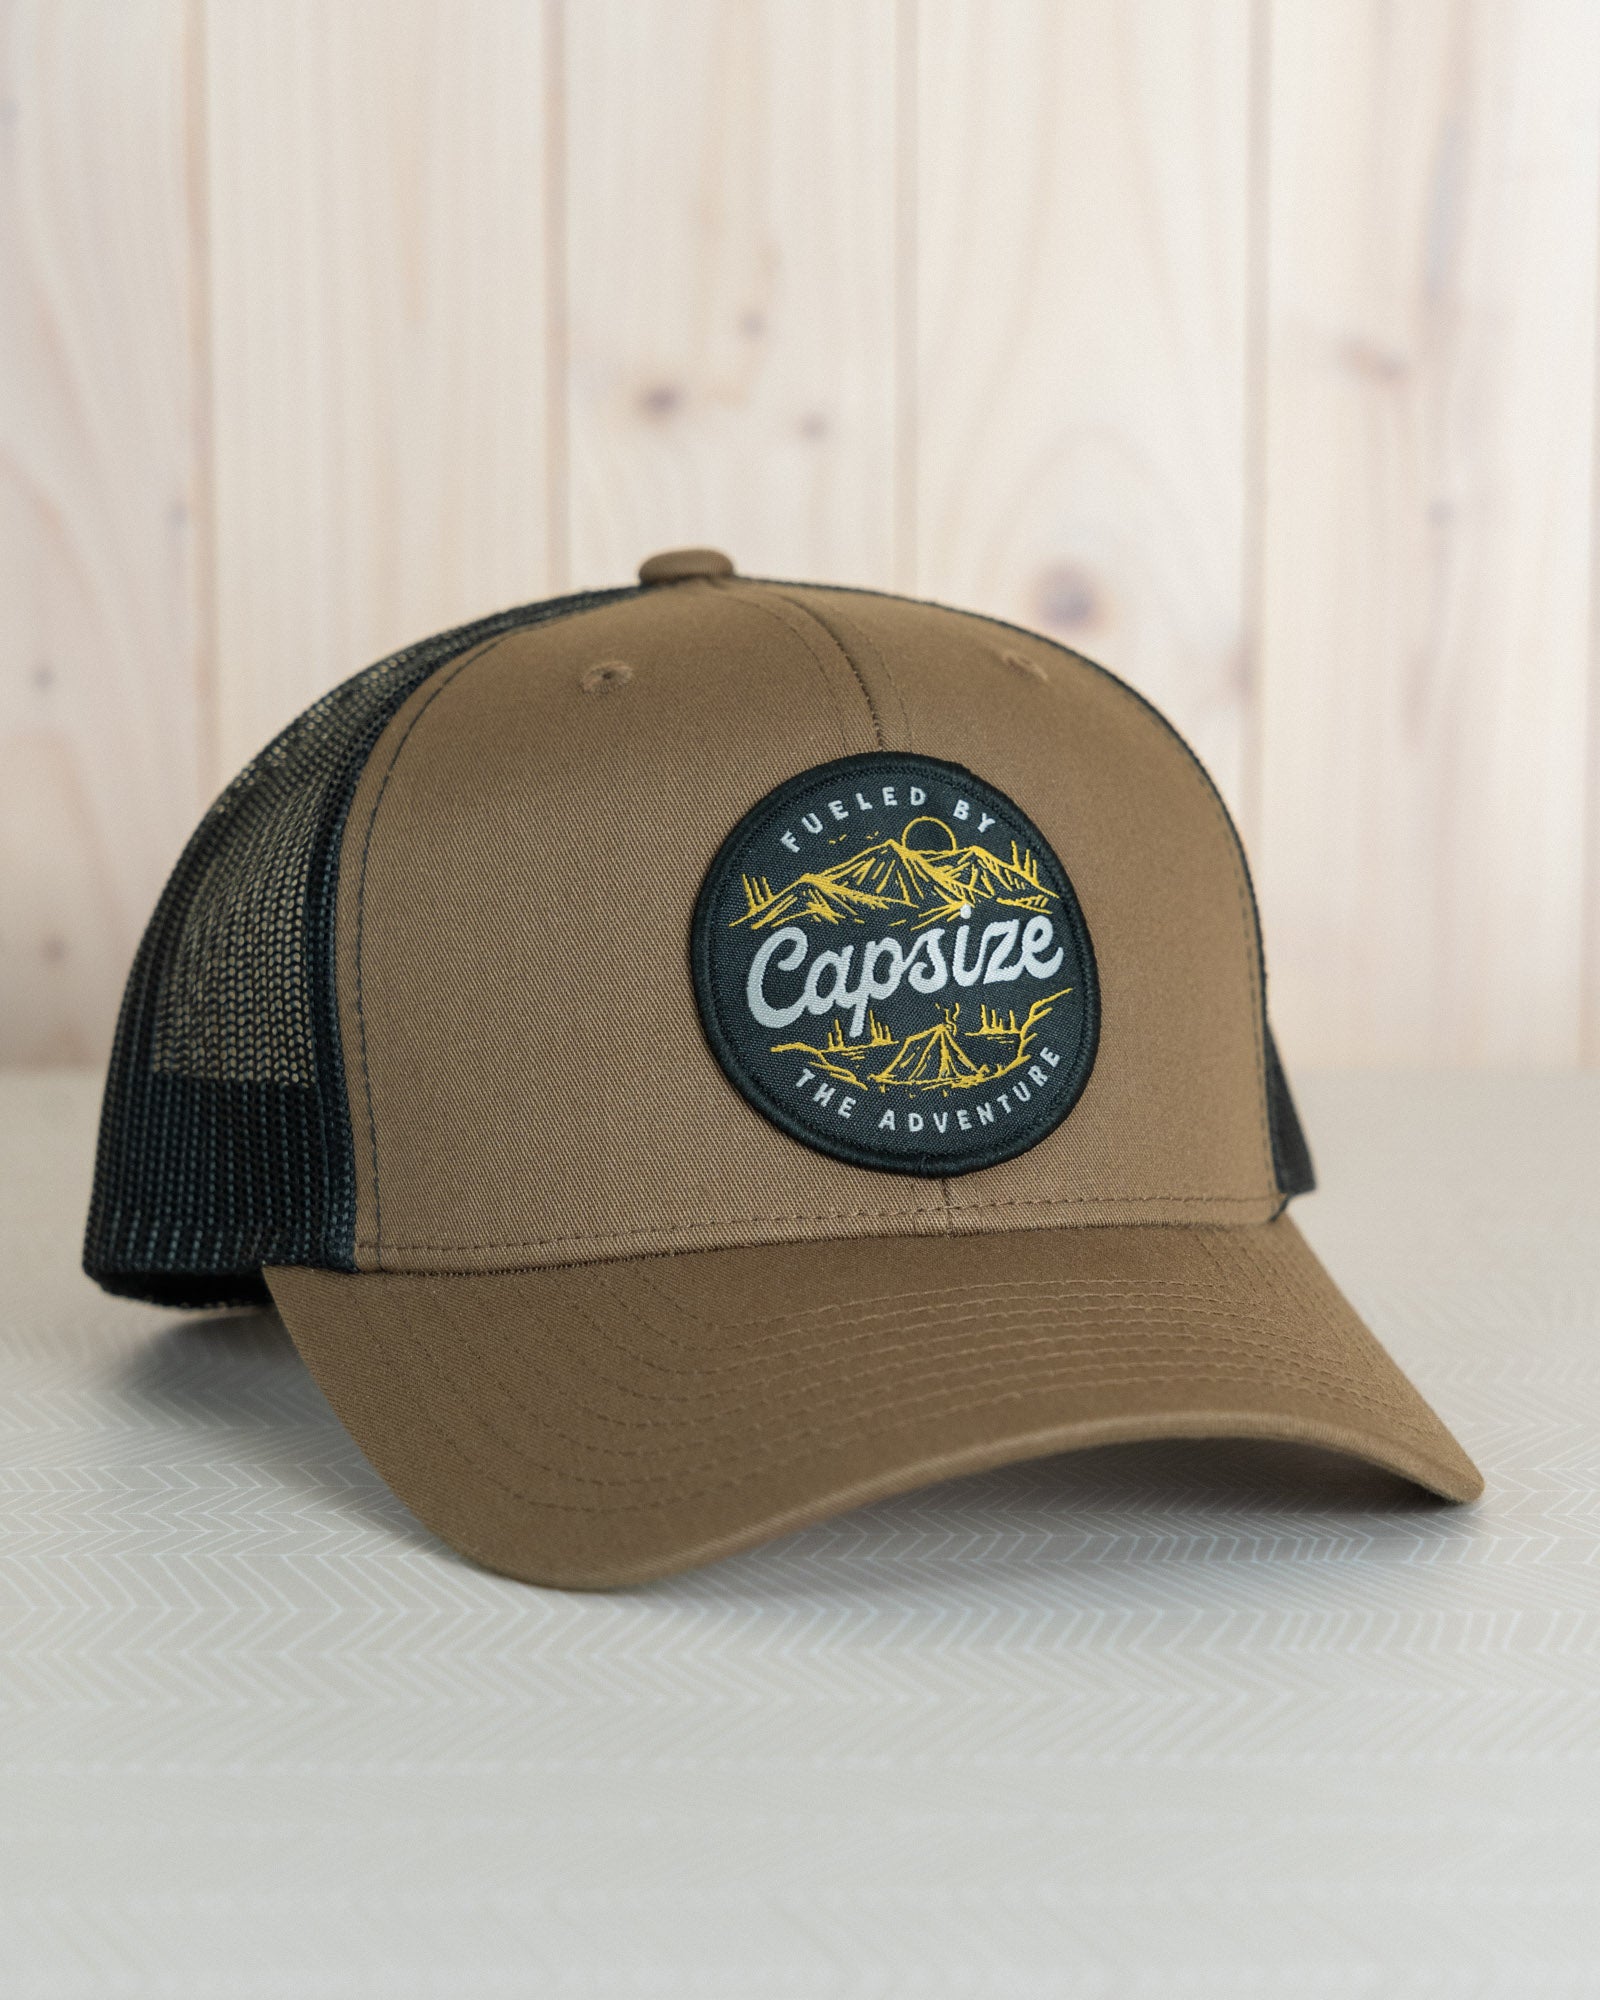 Fly Fishing Hat | Fueled By The Adventure Coyote Trucker - Capsize Fly Fishing